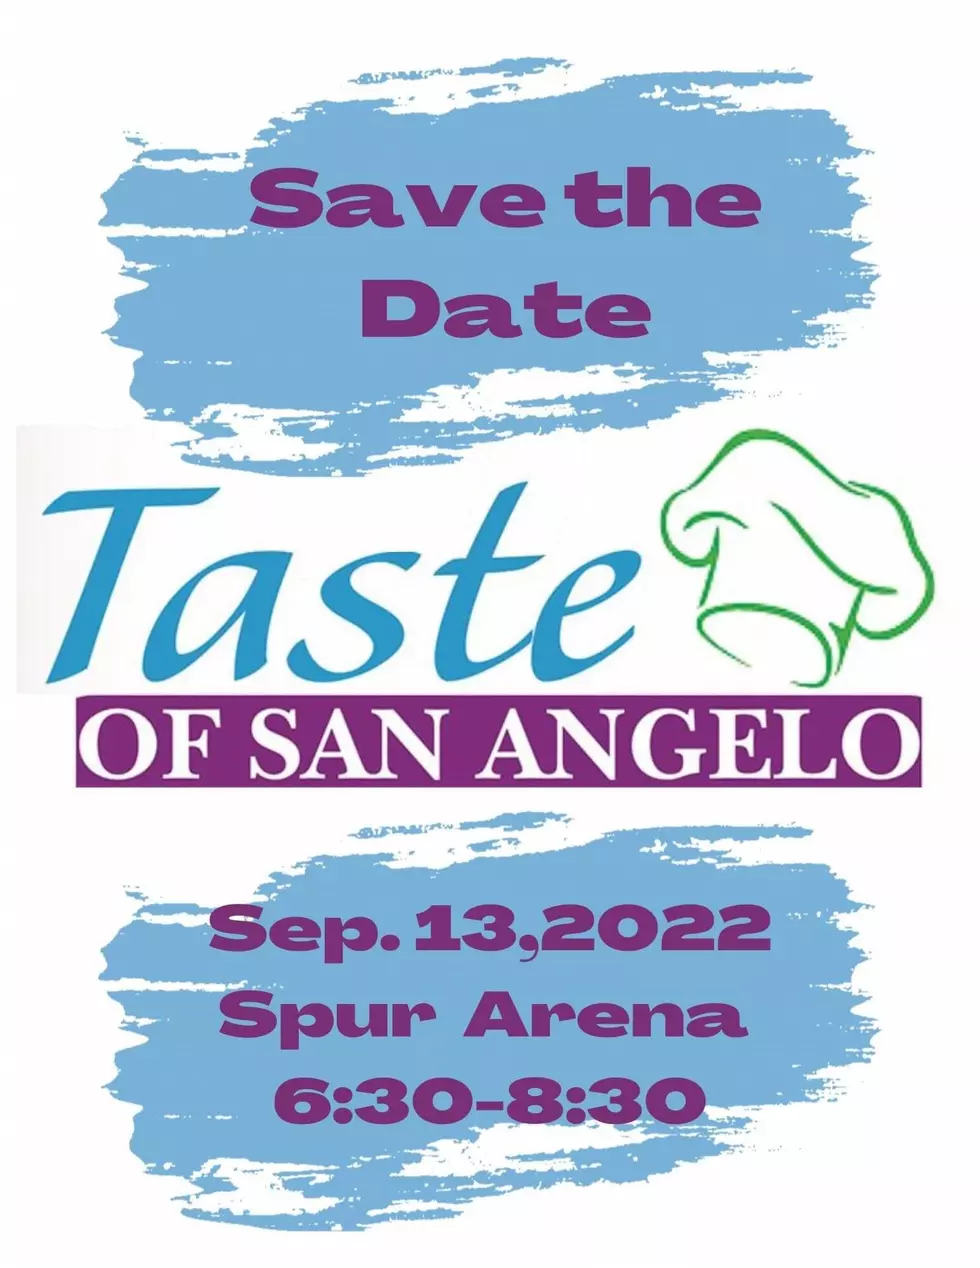 The 47th Taste of San Angelo is Tues, Sept 13th